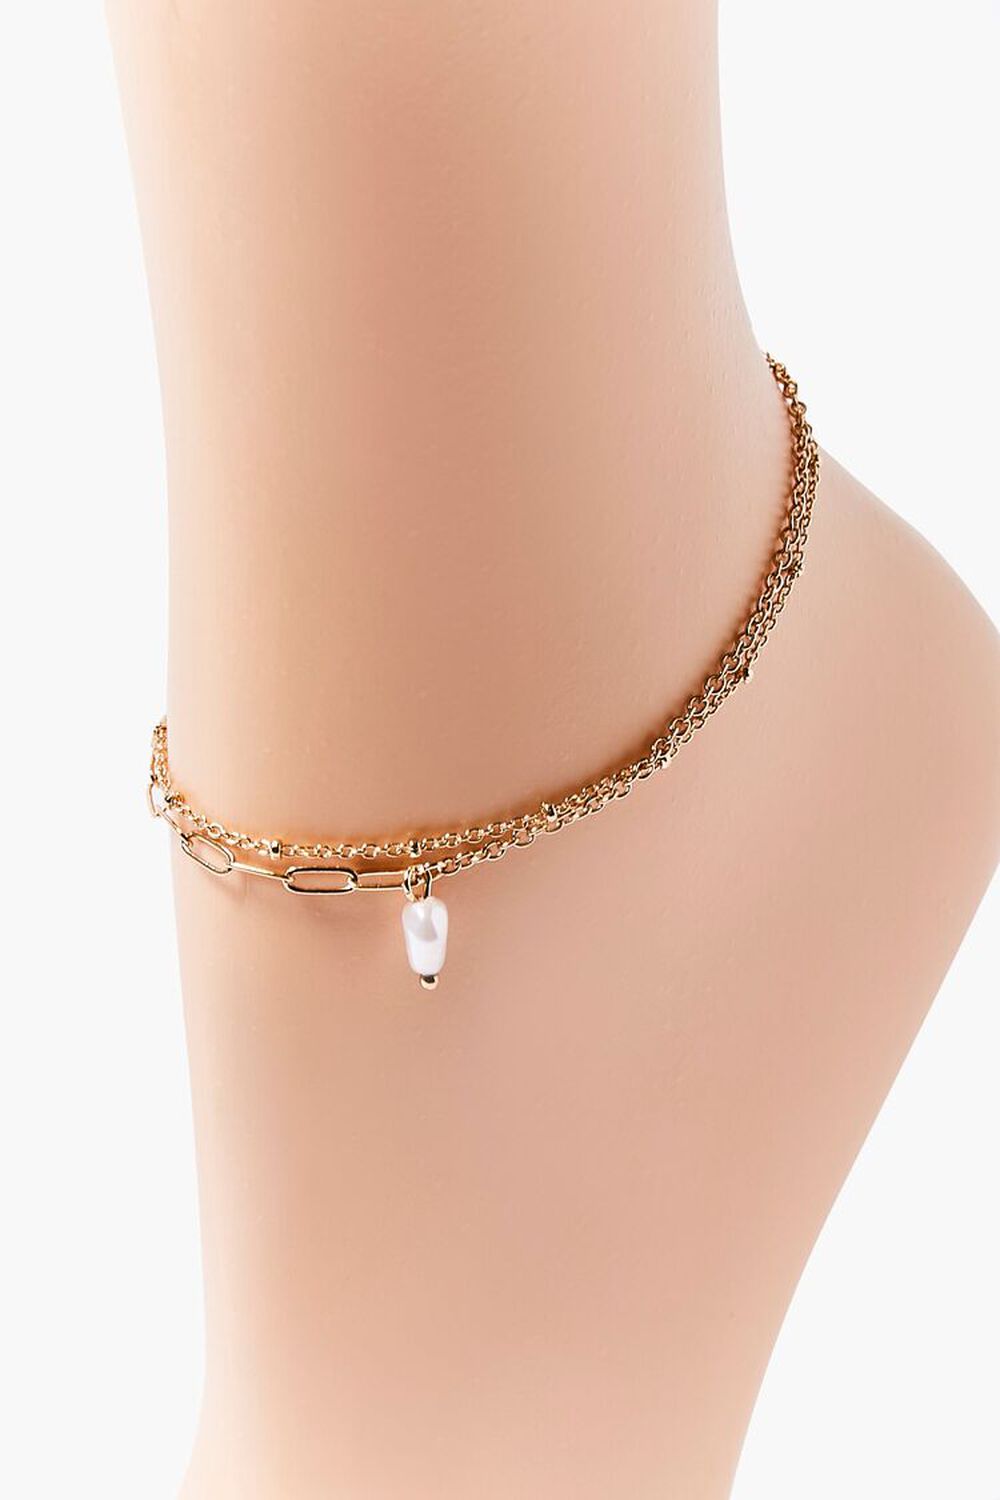 Faux Pearl Layered Anklet, image 2